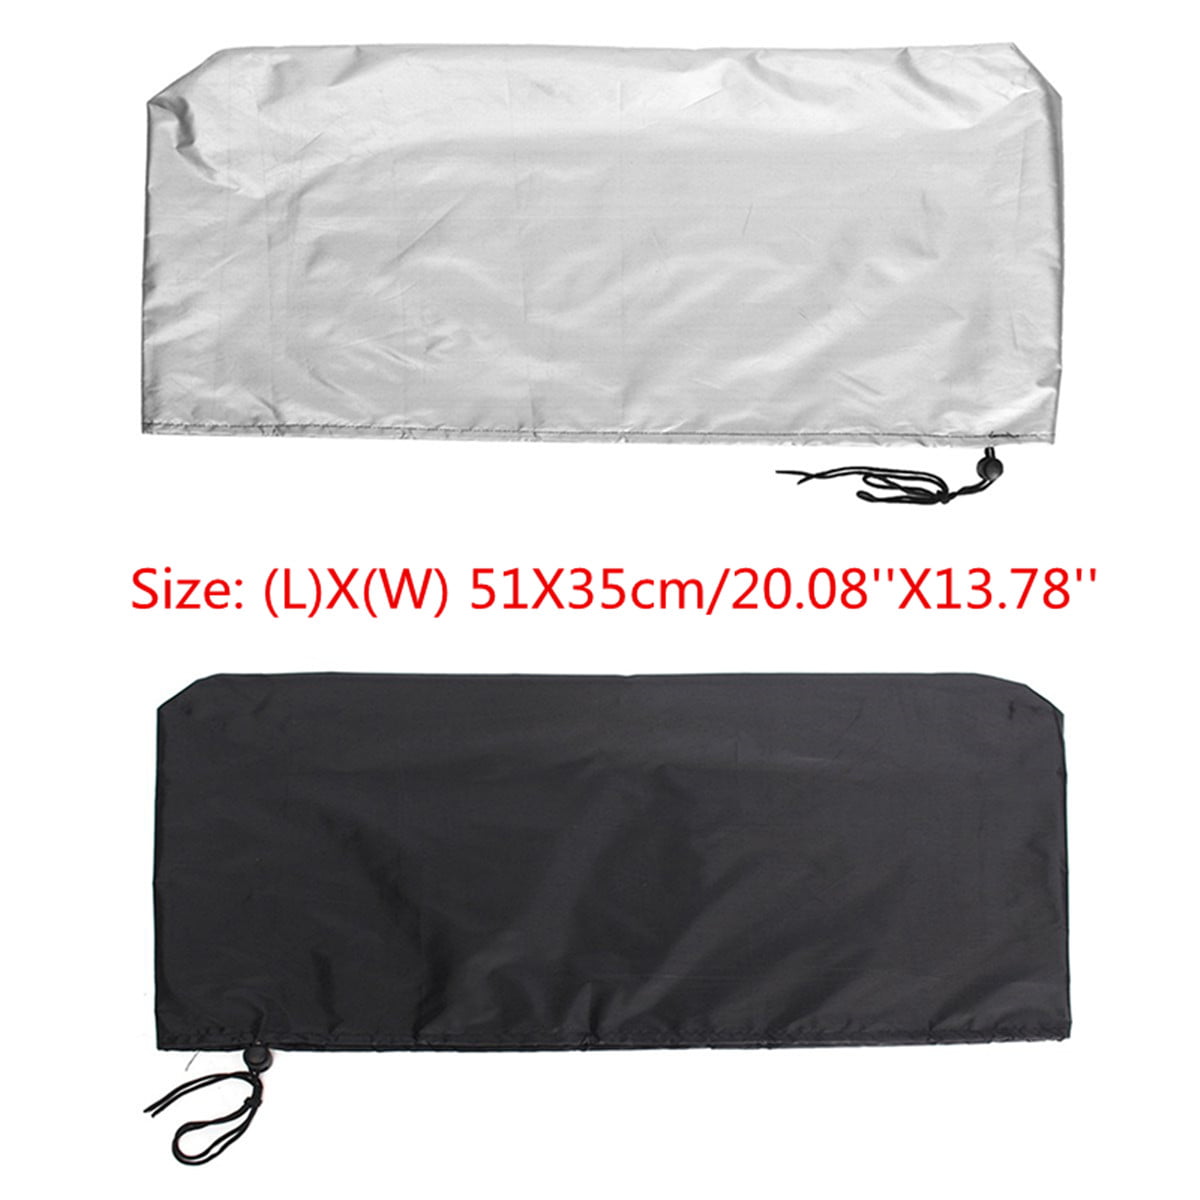 Computer Flat Screen Monitor Dust Cover LED PC TV 19-21 Inch Laptop 